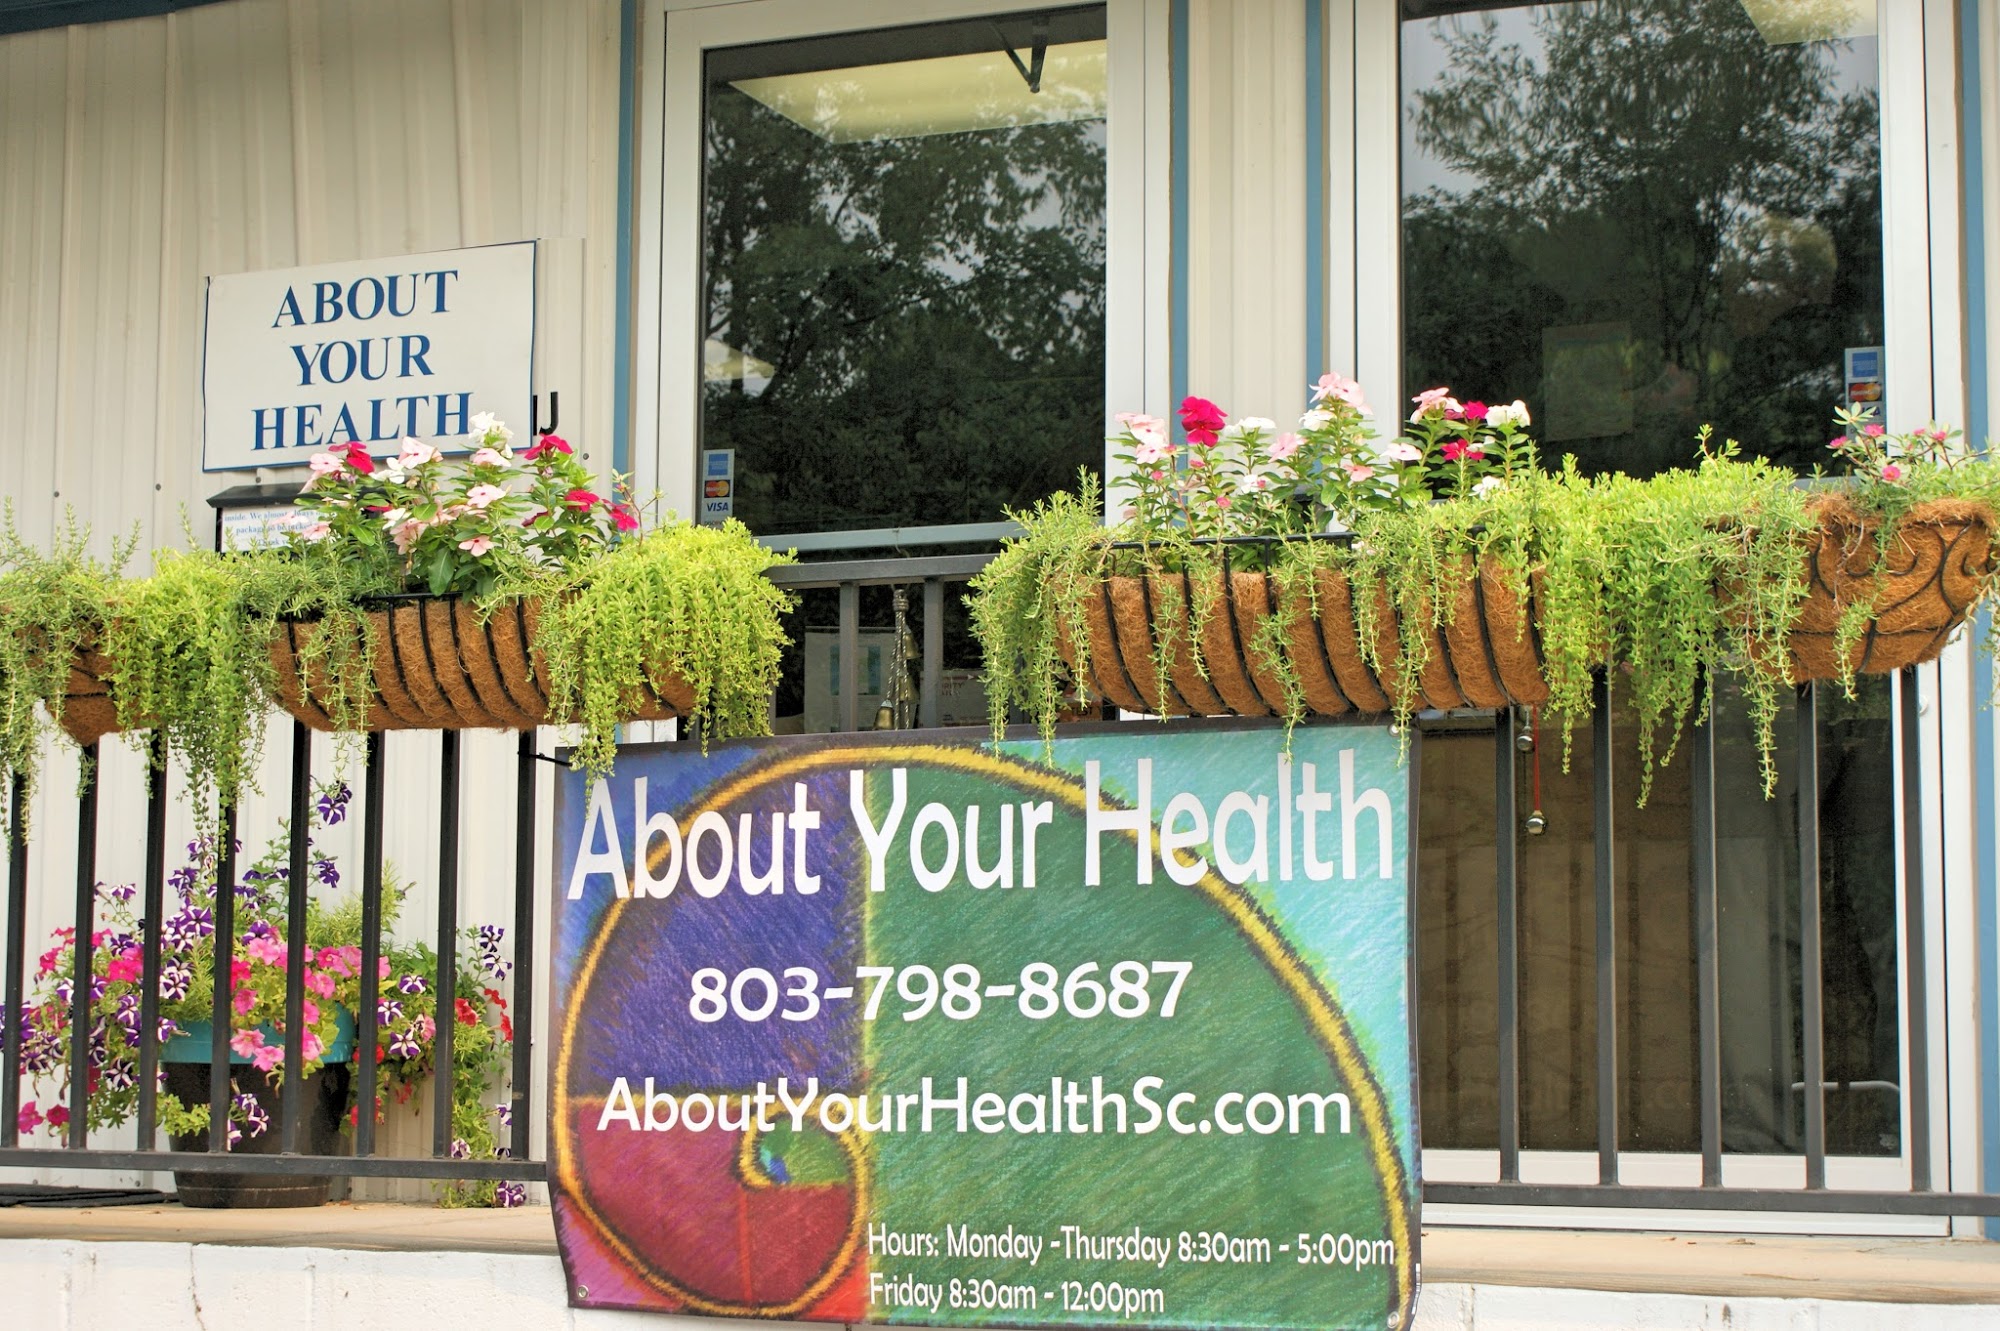 About Your Health, Columbia, SC